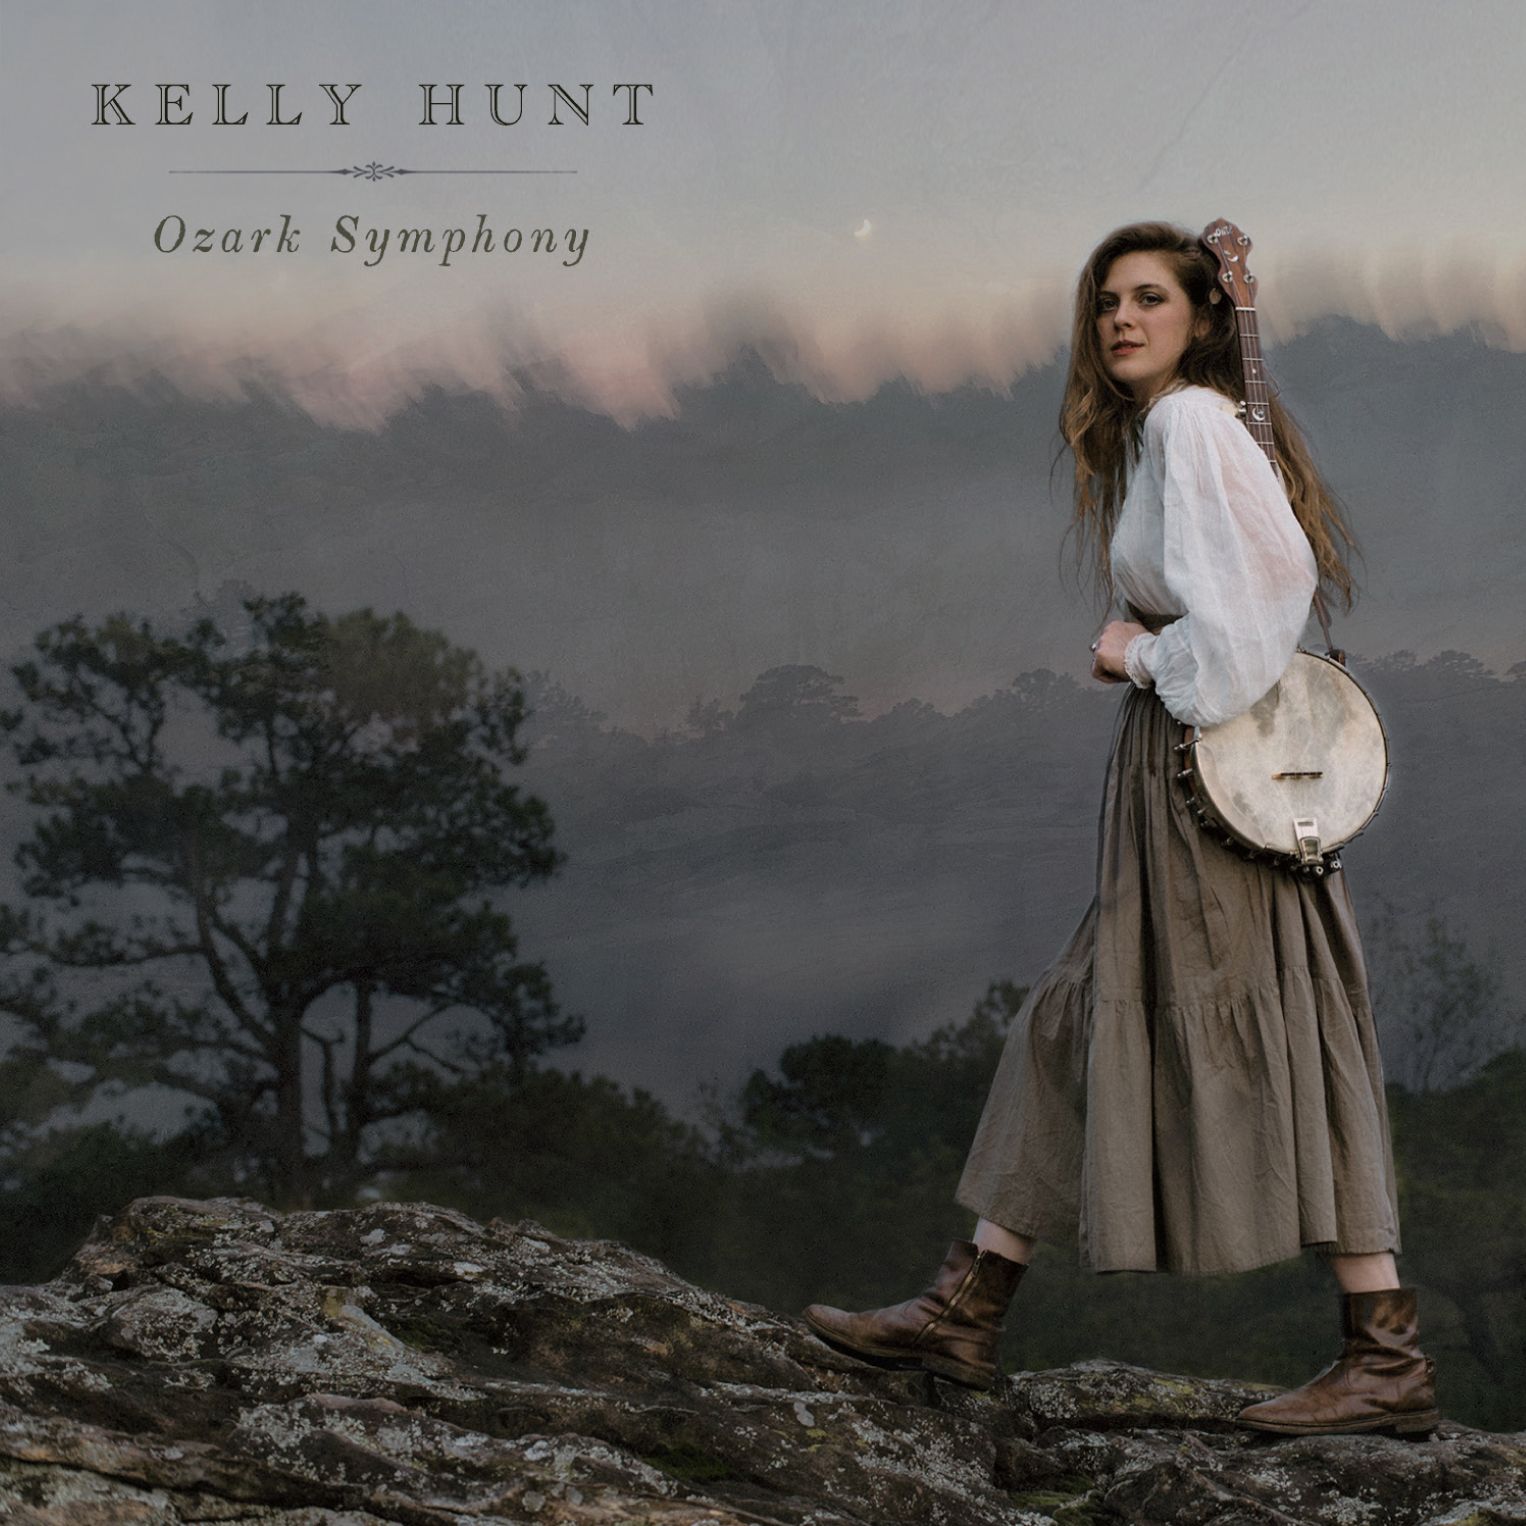 Rediscover the Spirit of America with Kelly Hunt's "OZARK SYMPHONY"